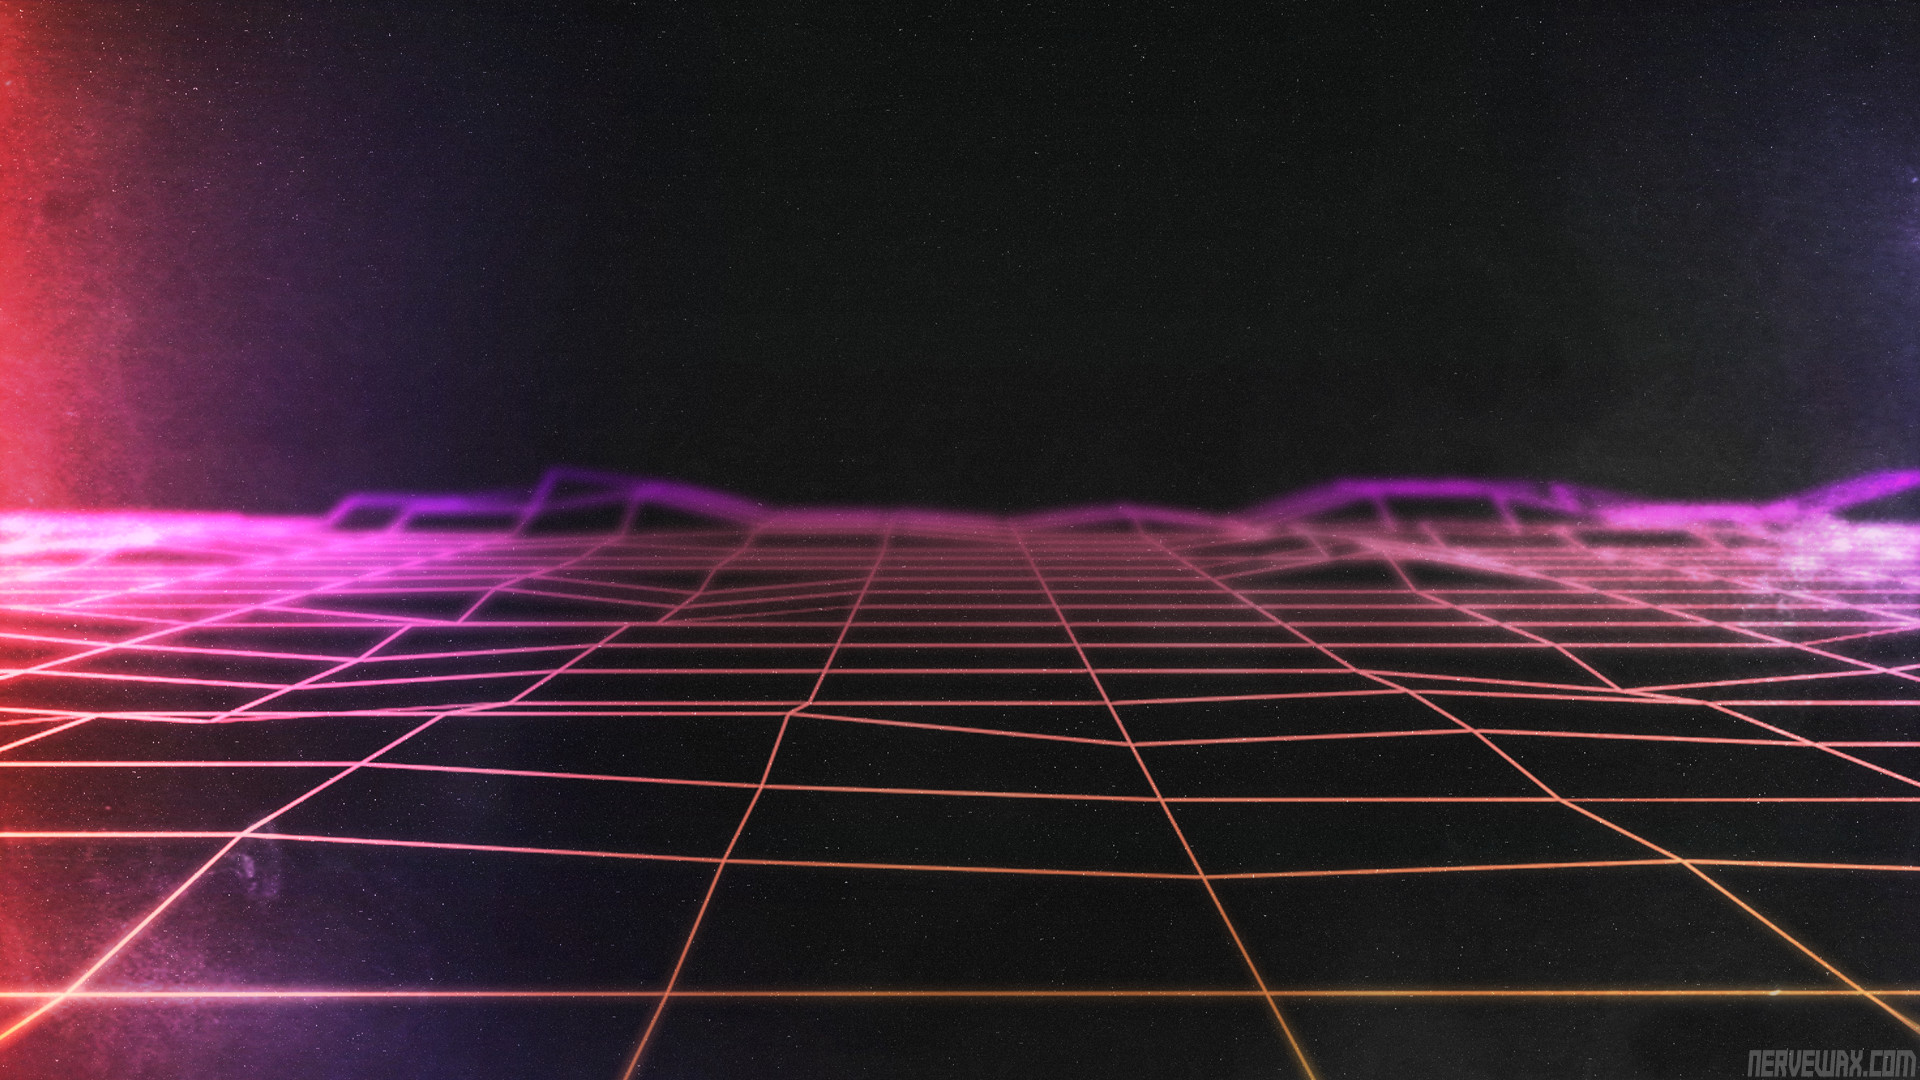 1920x1080 "The Grid" a wallpaper to go with a poster I made, which is over at  /r/Cyberpunk